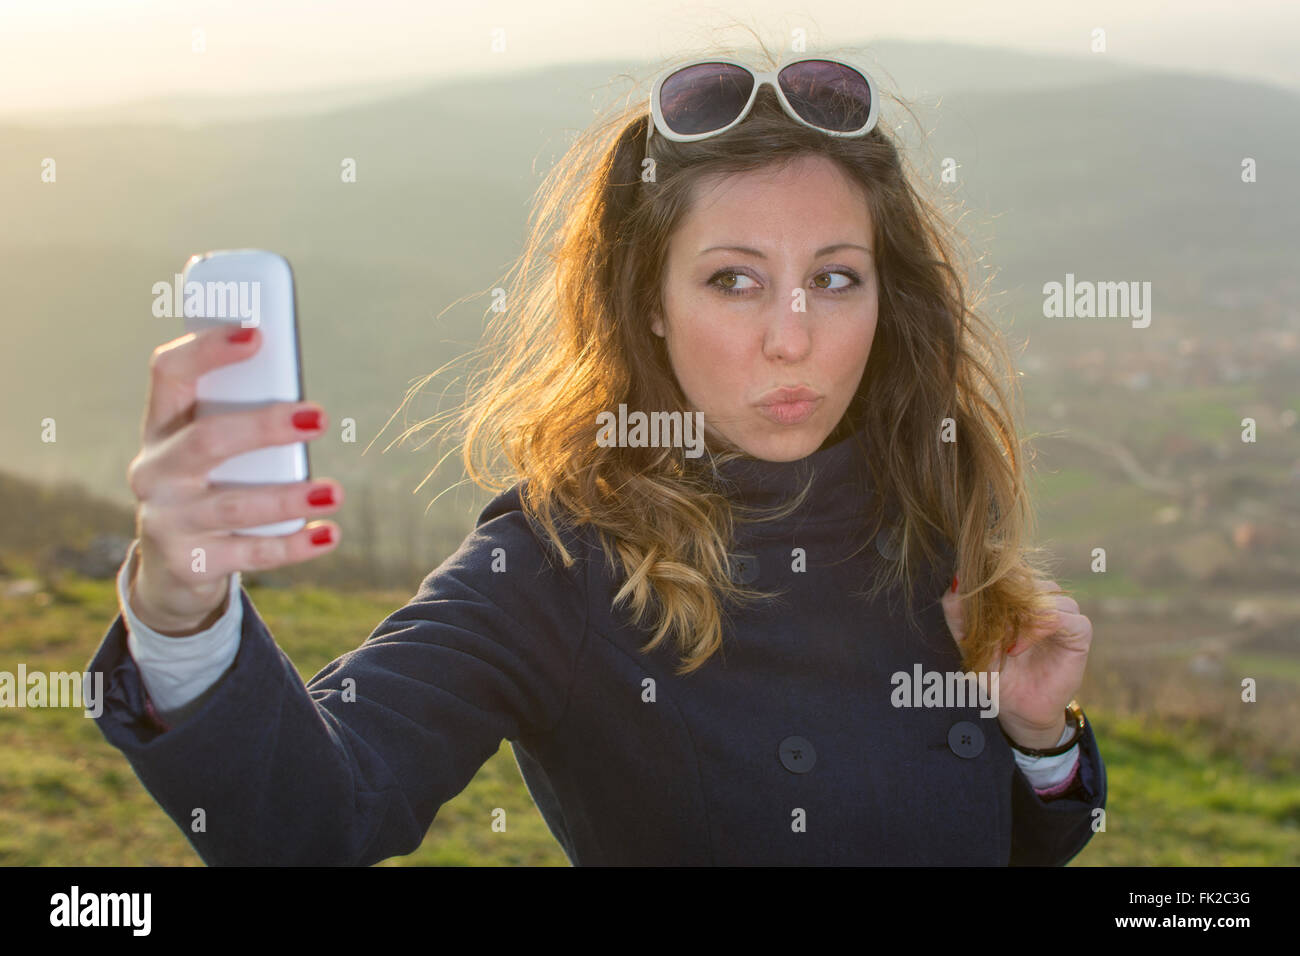 Girl taking a selfie on a hiking trip at sunset Stock Photo